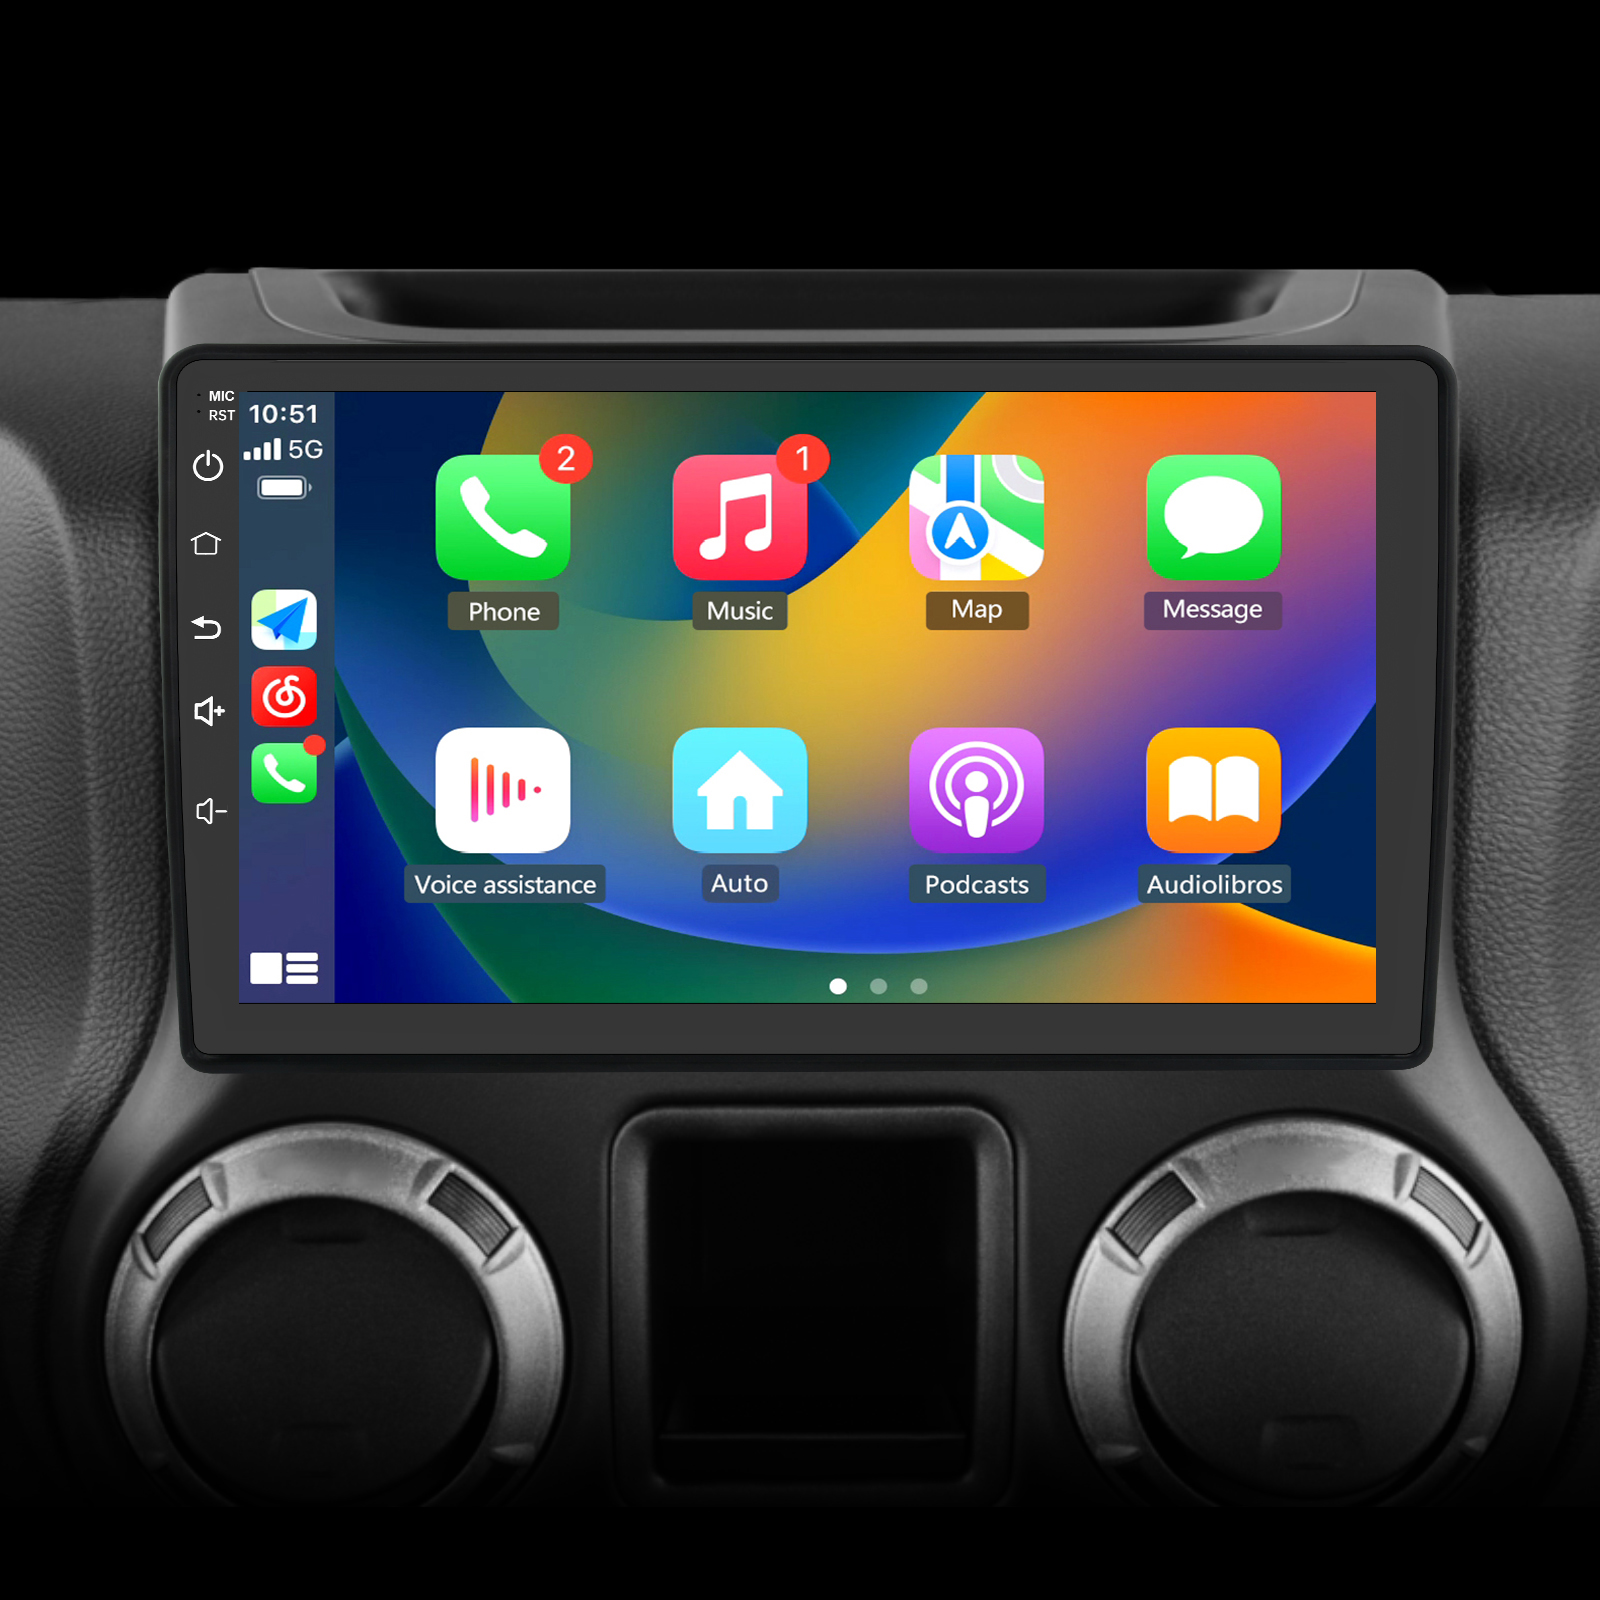 US$ 199.99 - AWESAFE Car Radio Stereo Andriod 10 for Jeep Wrangler JK  2007-2018 Head Unit with Built in Apple Carplay Andriod Auto -  www.awesafeshop.com